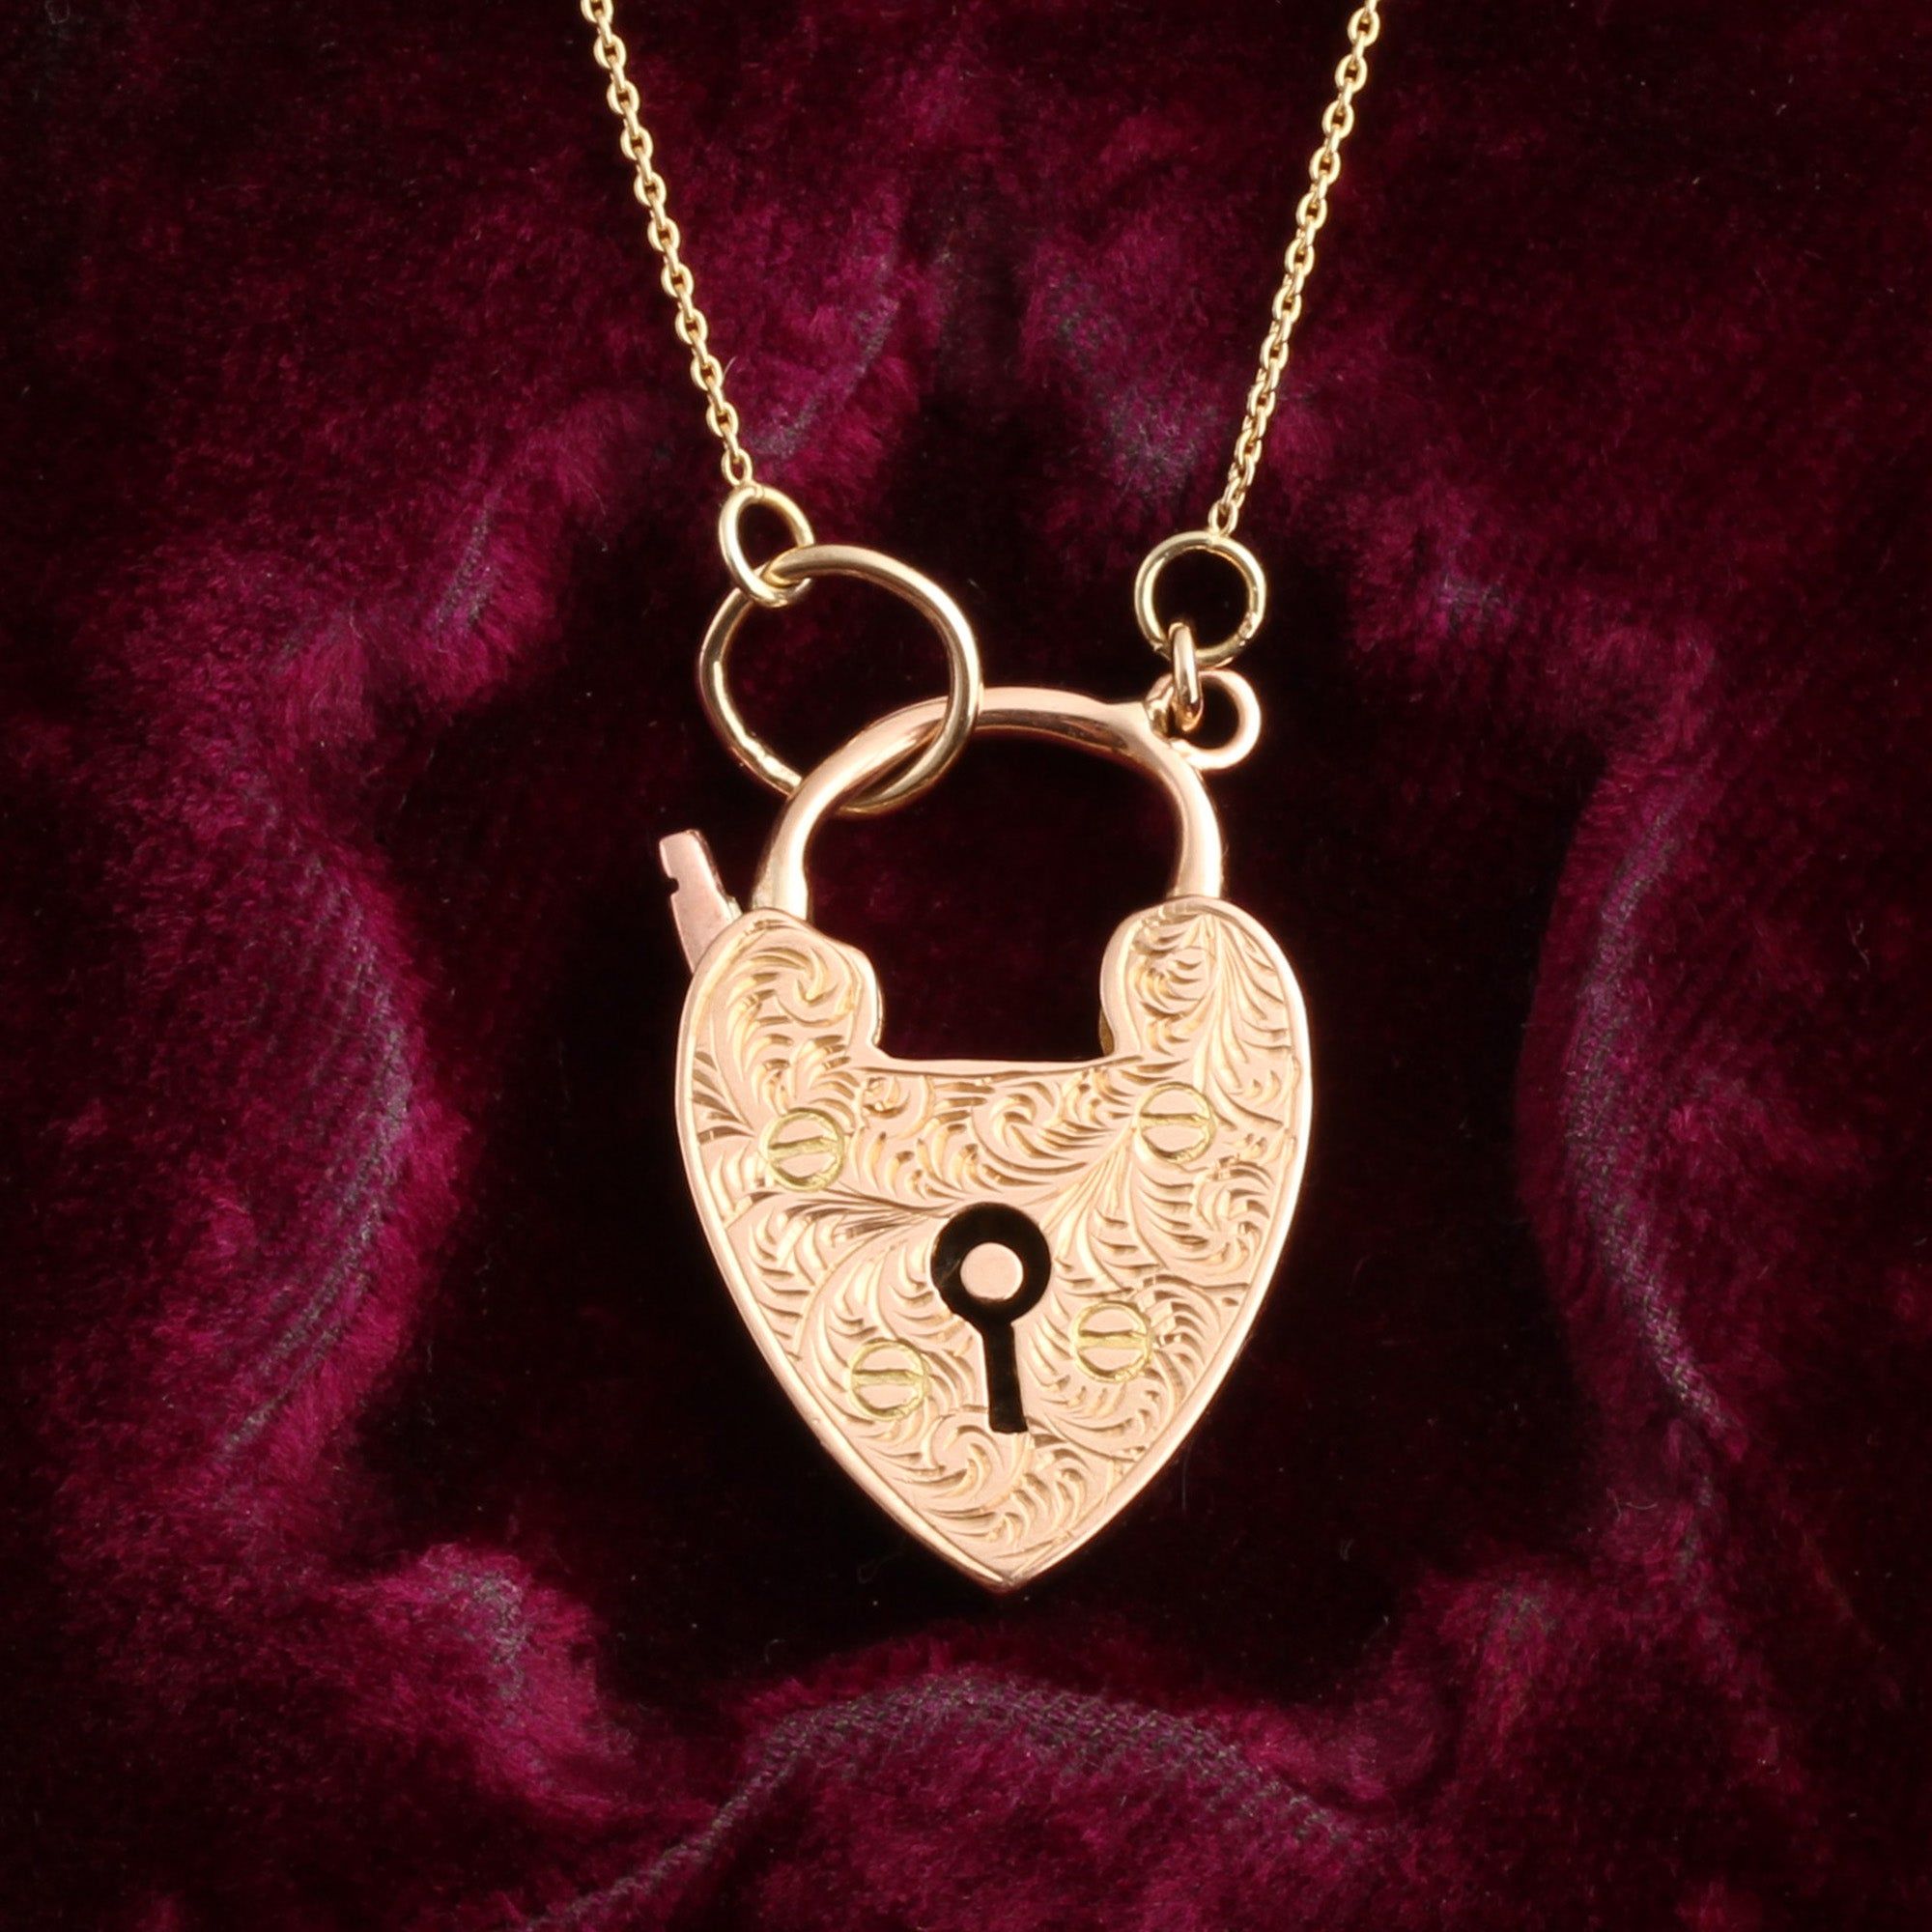 Locked Heart Necklace – Sour Cherry